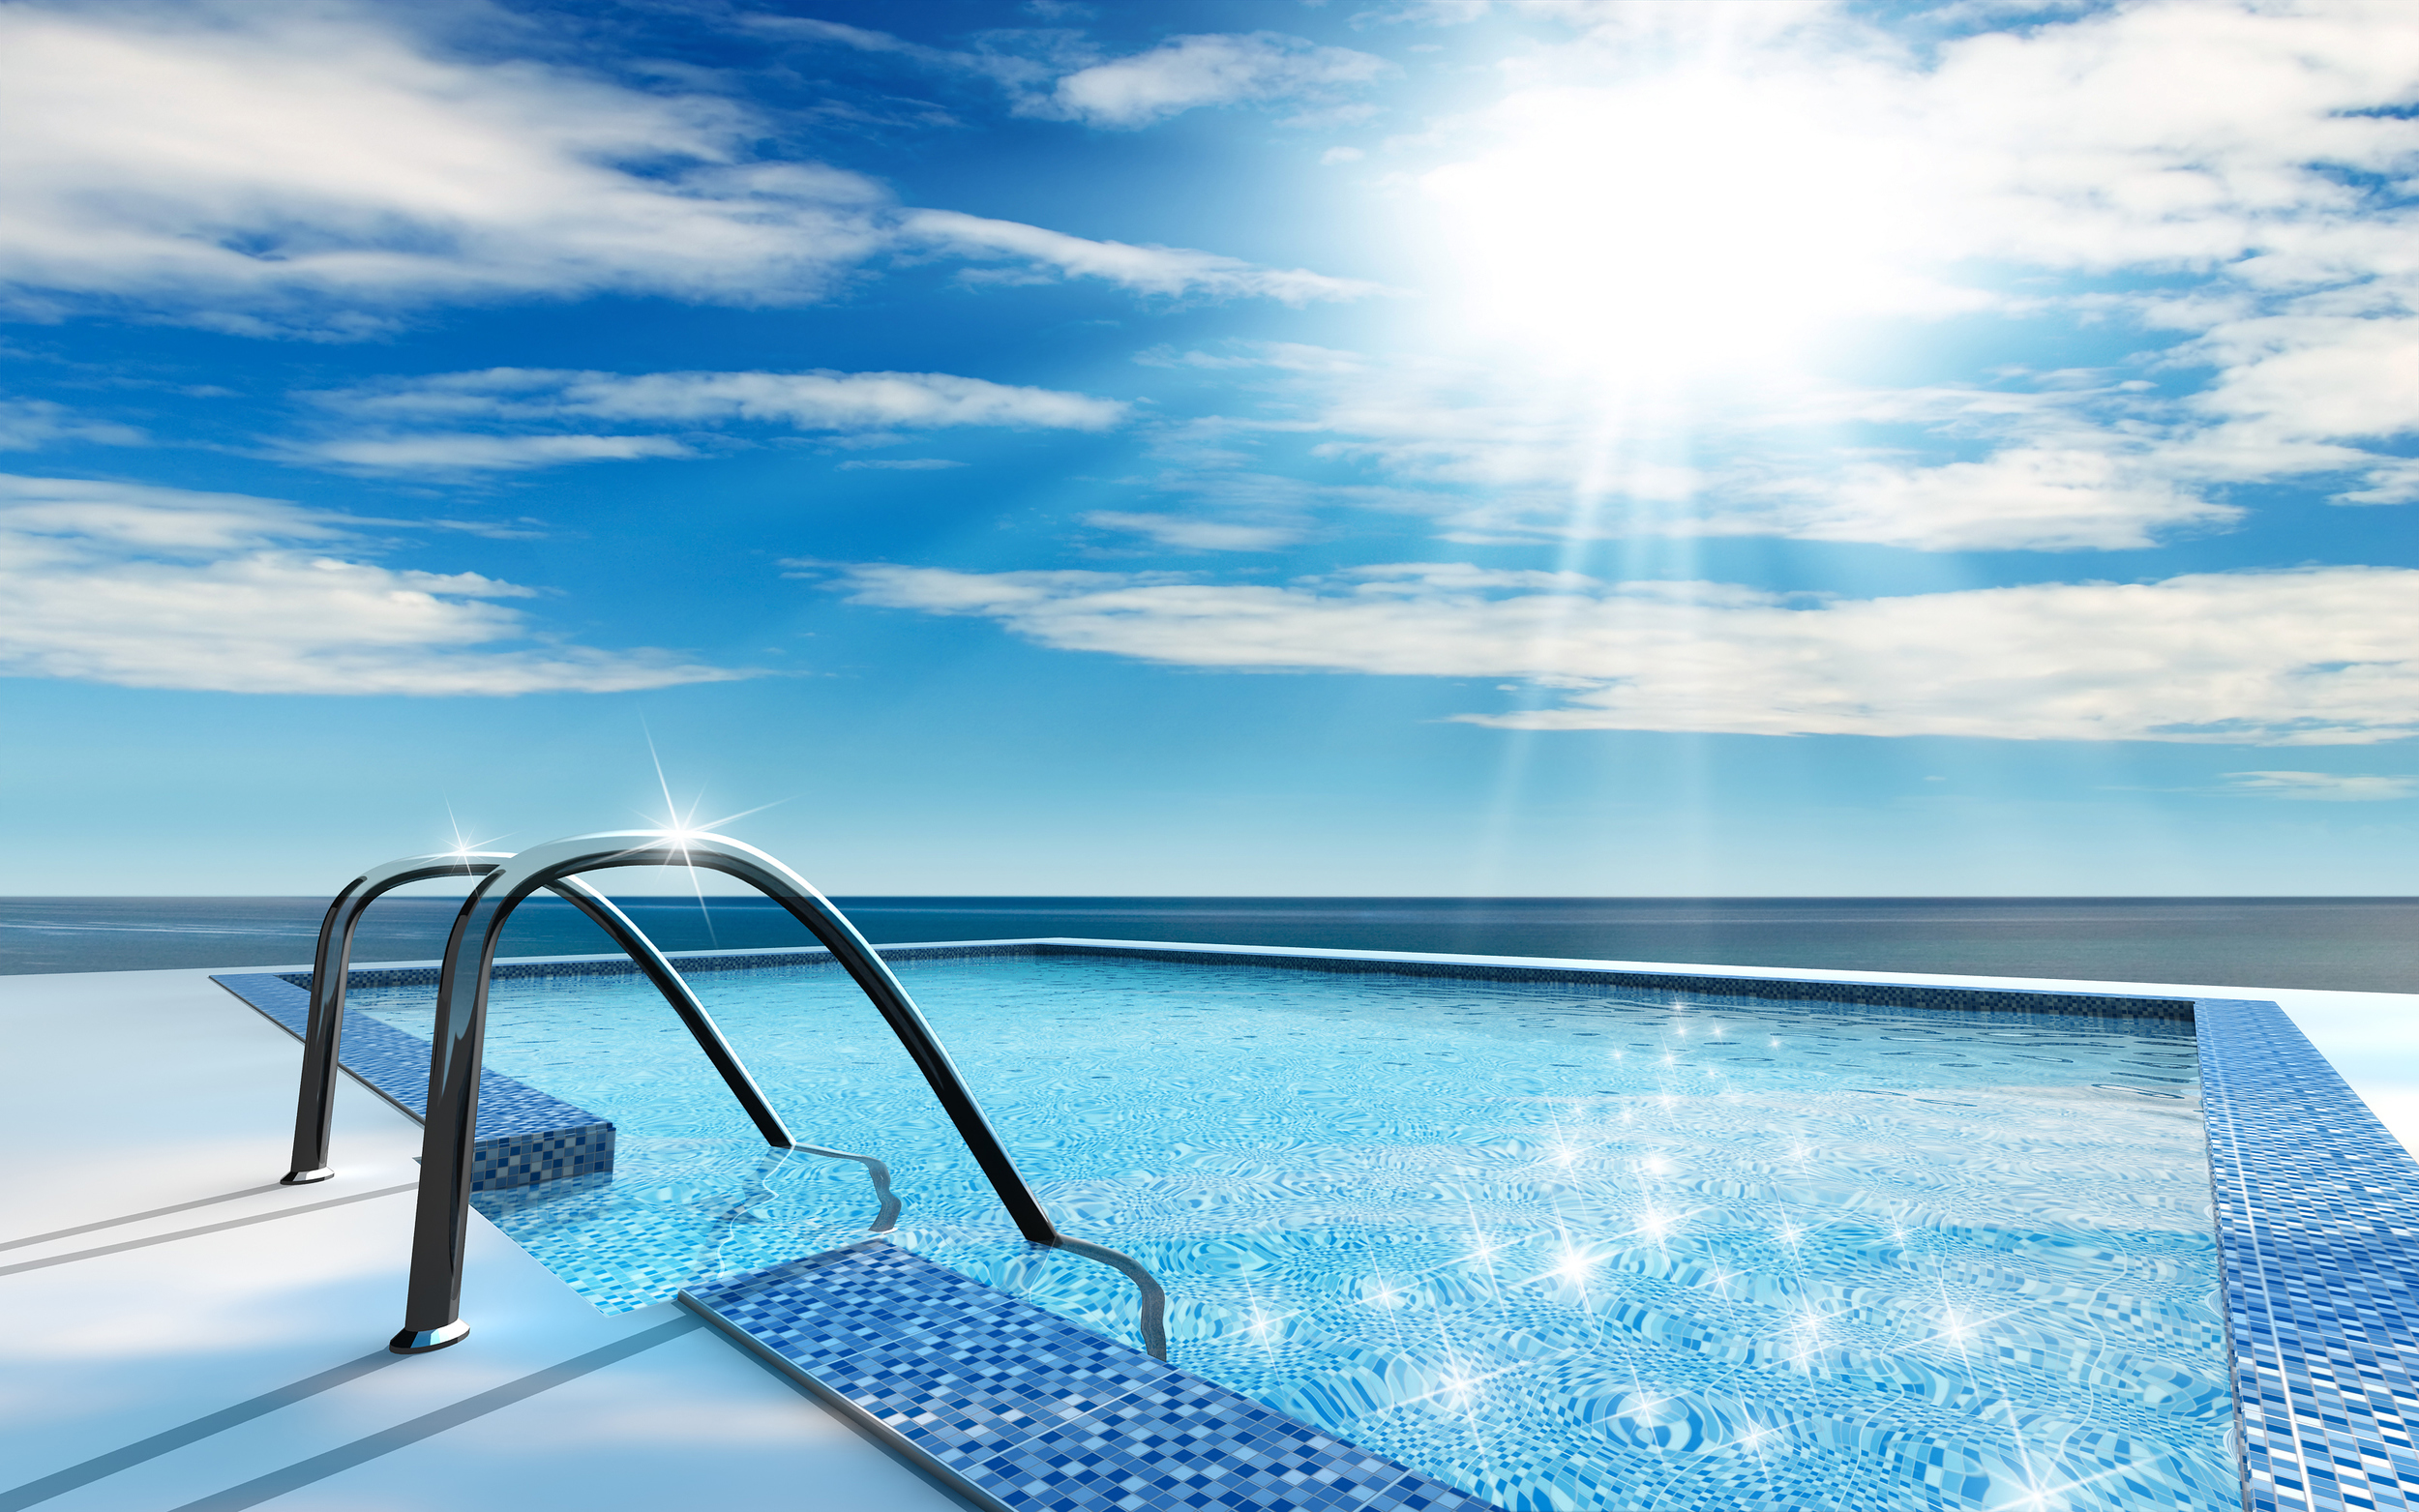 Swimming Pool Inspections